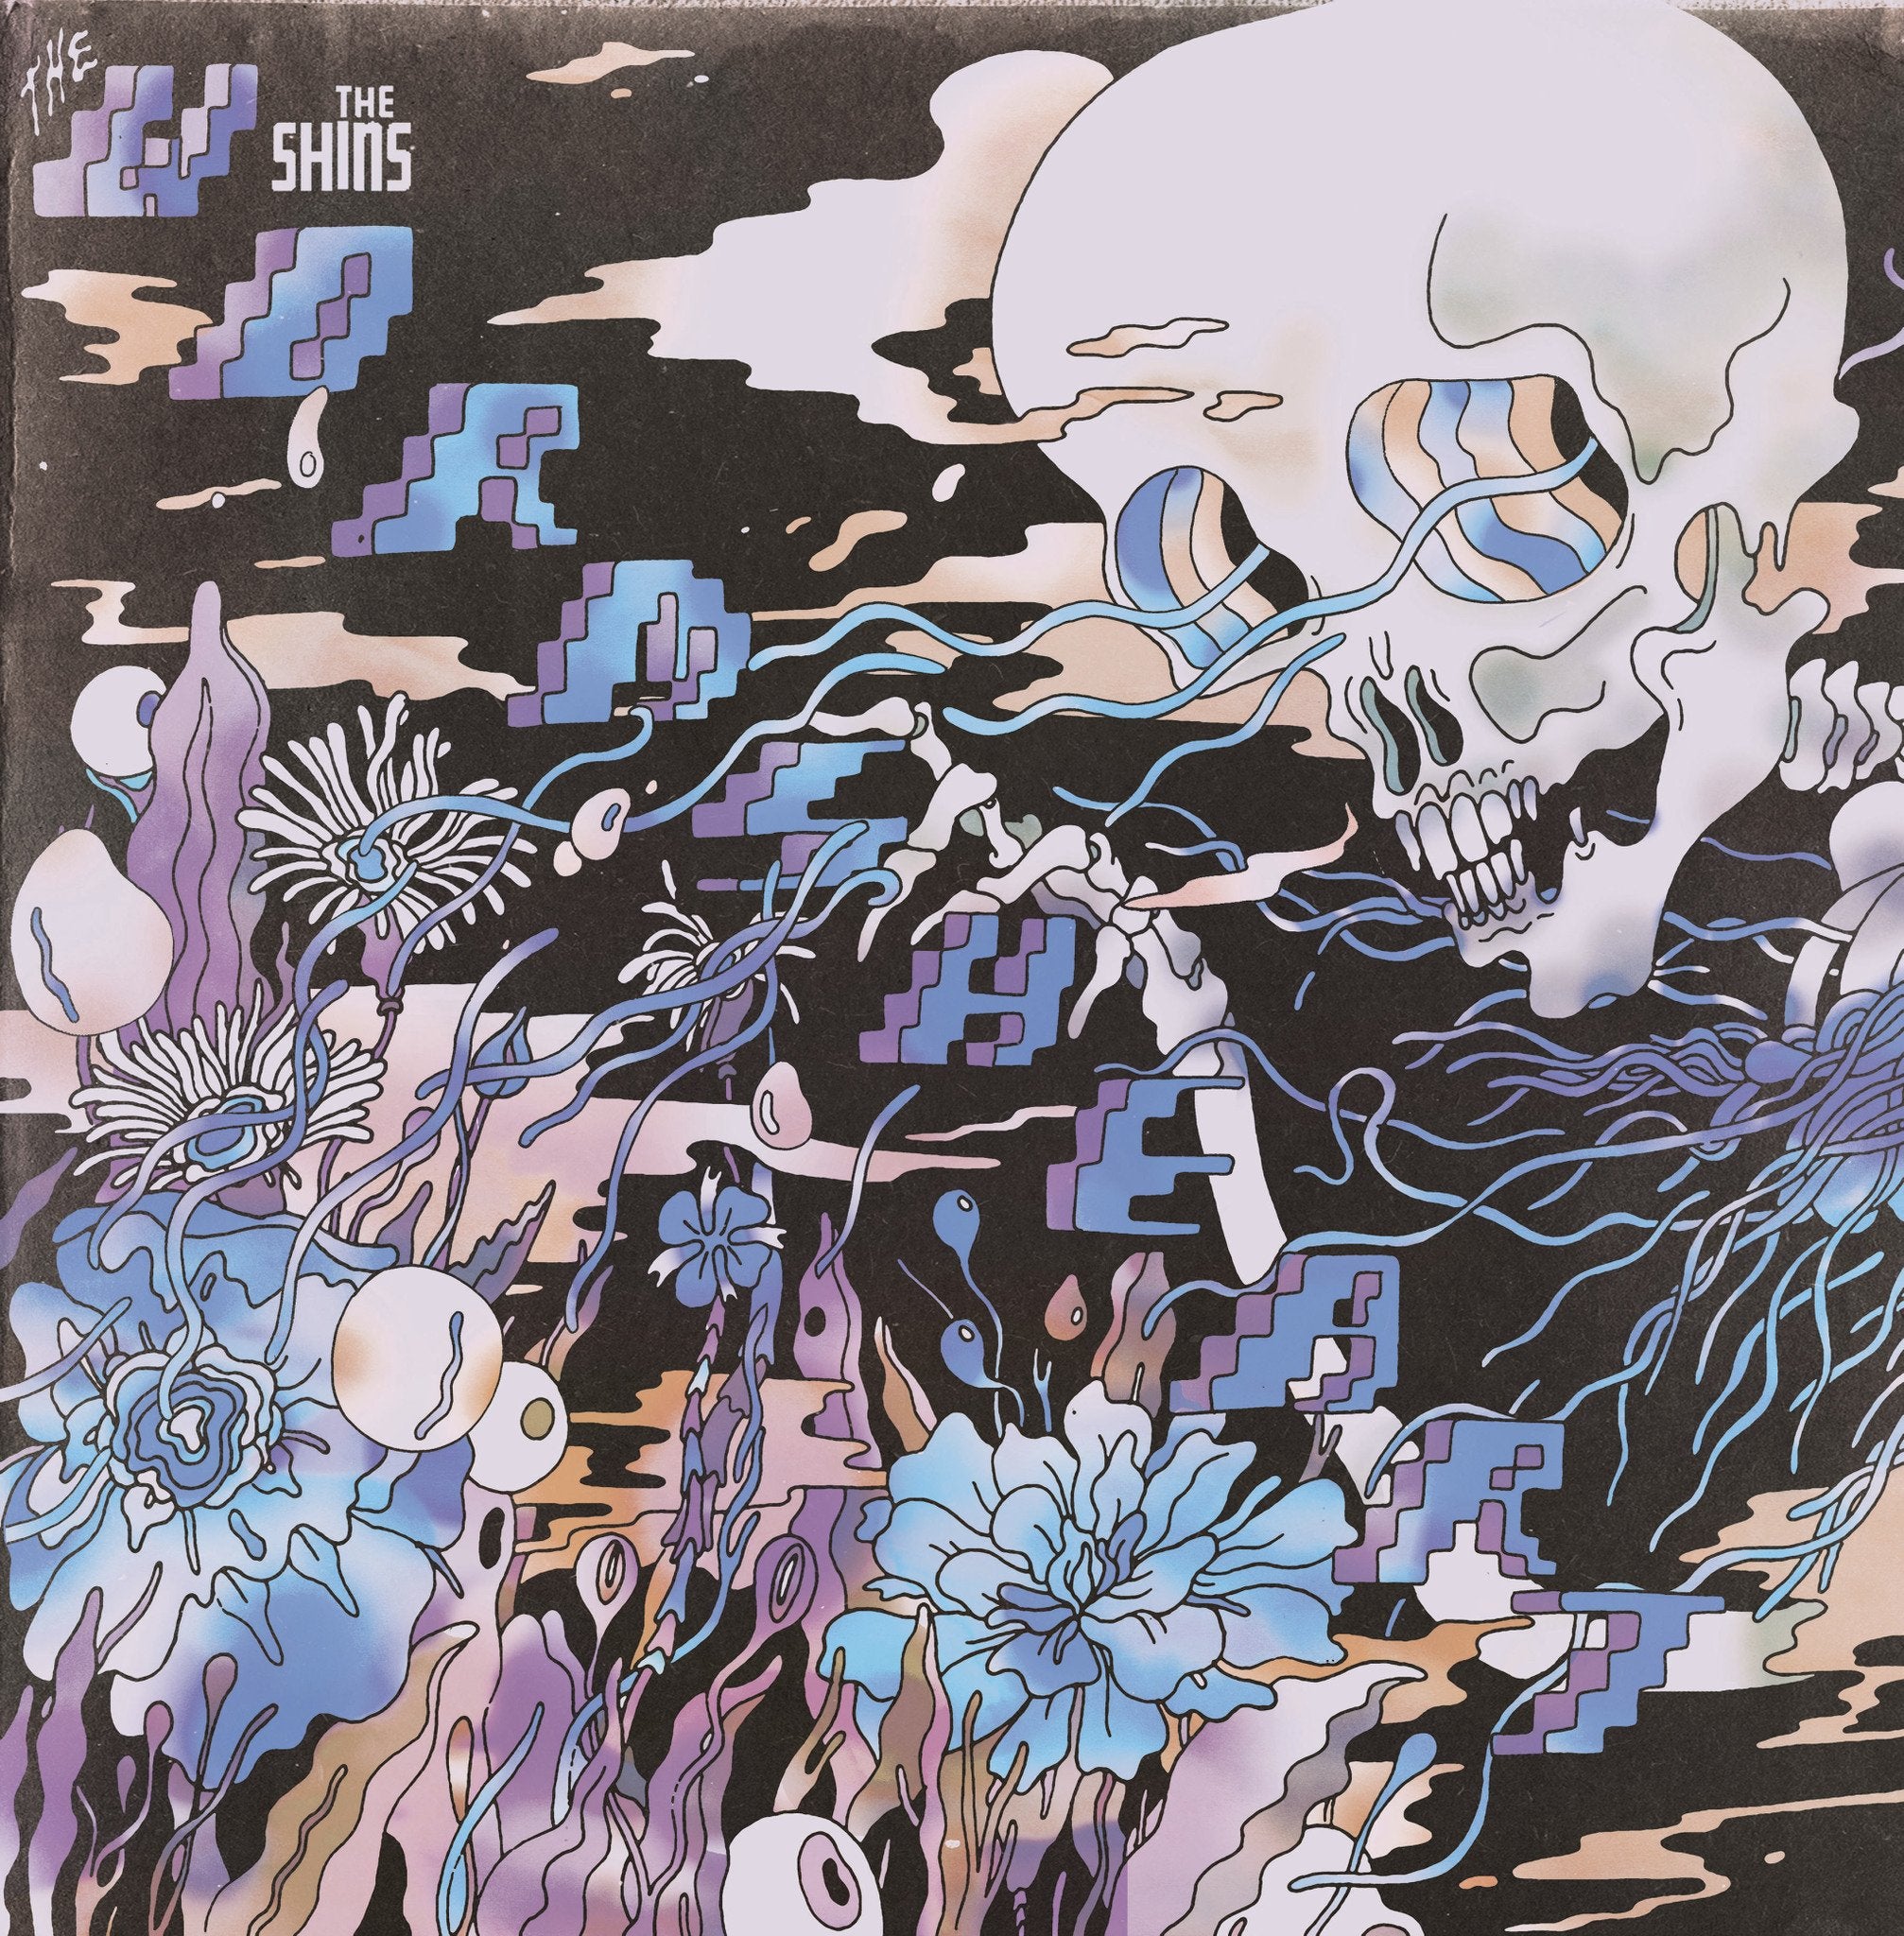 Shins - The Worms Heart LP